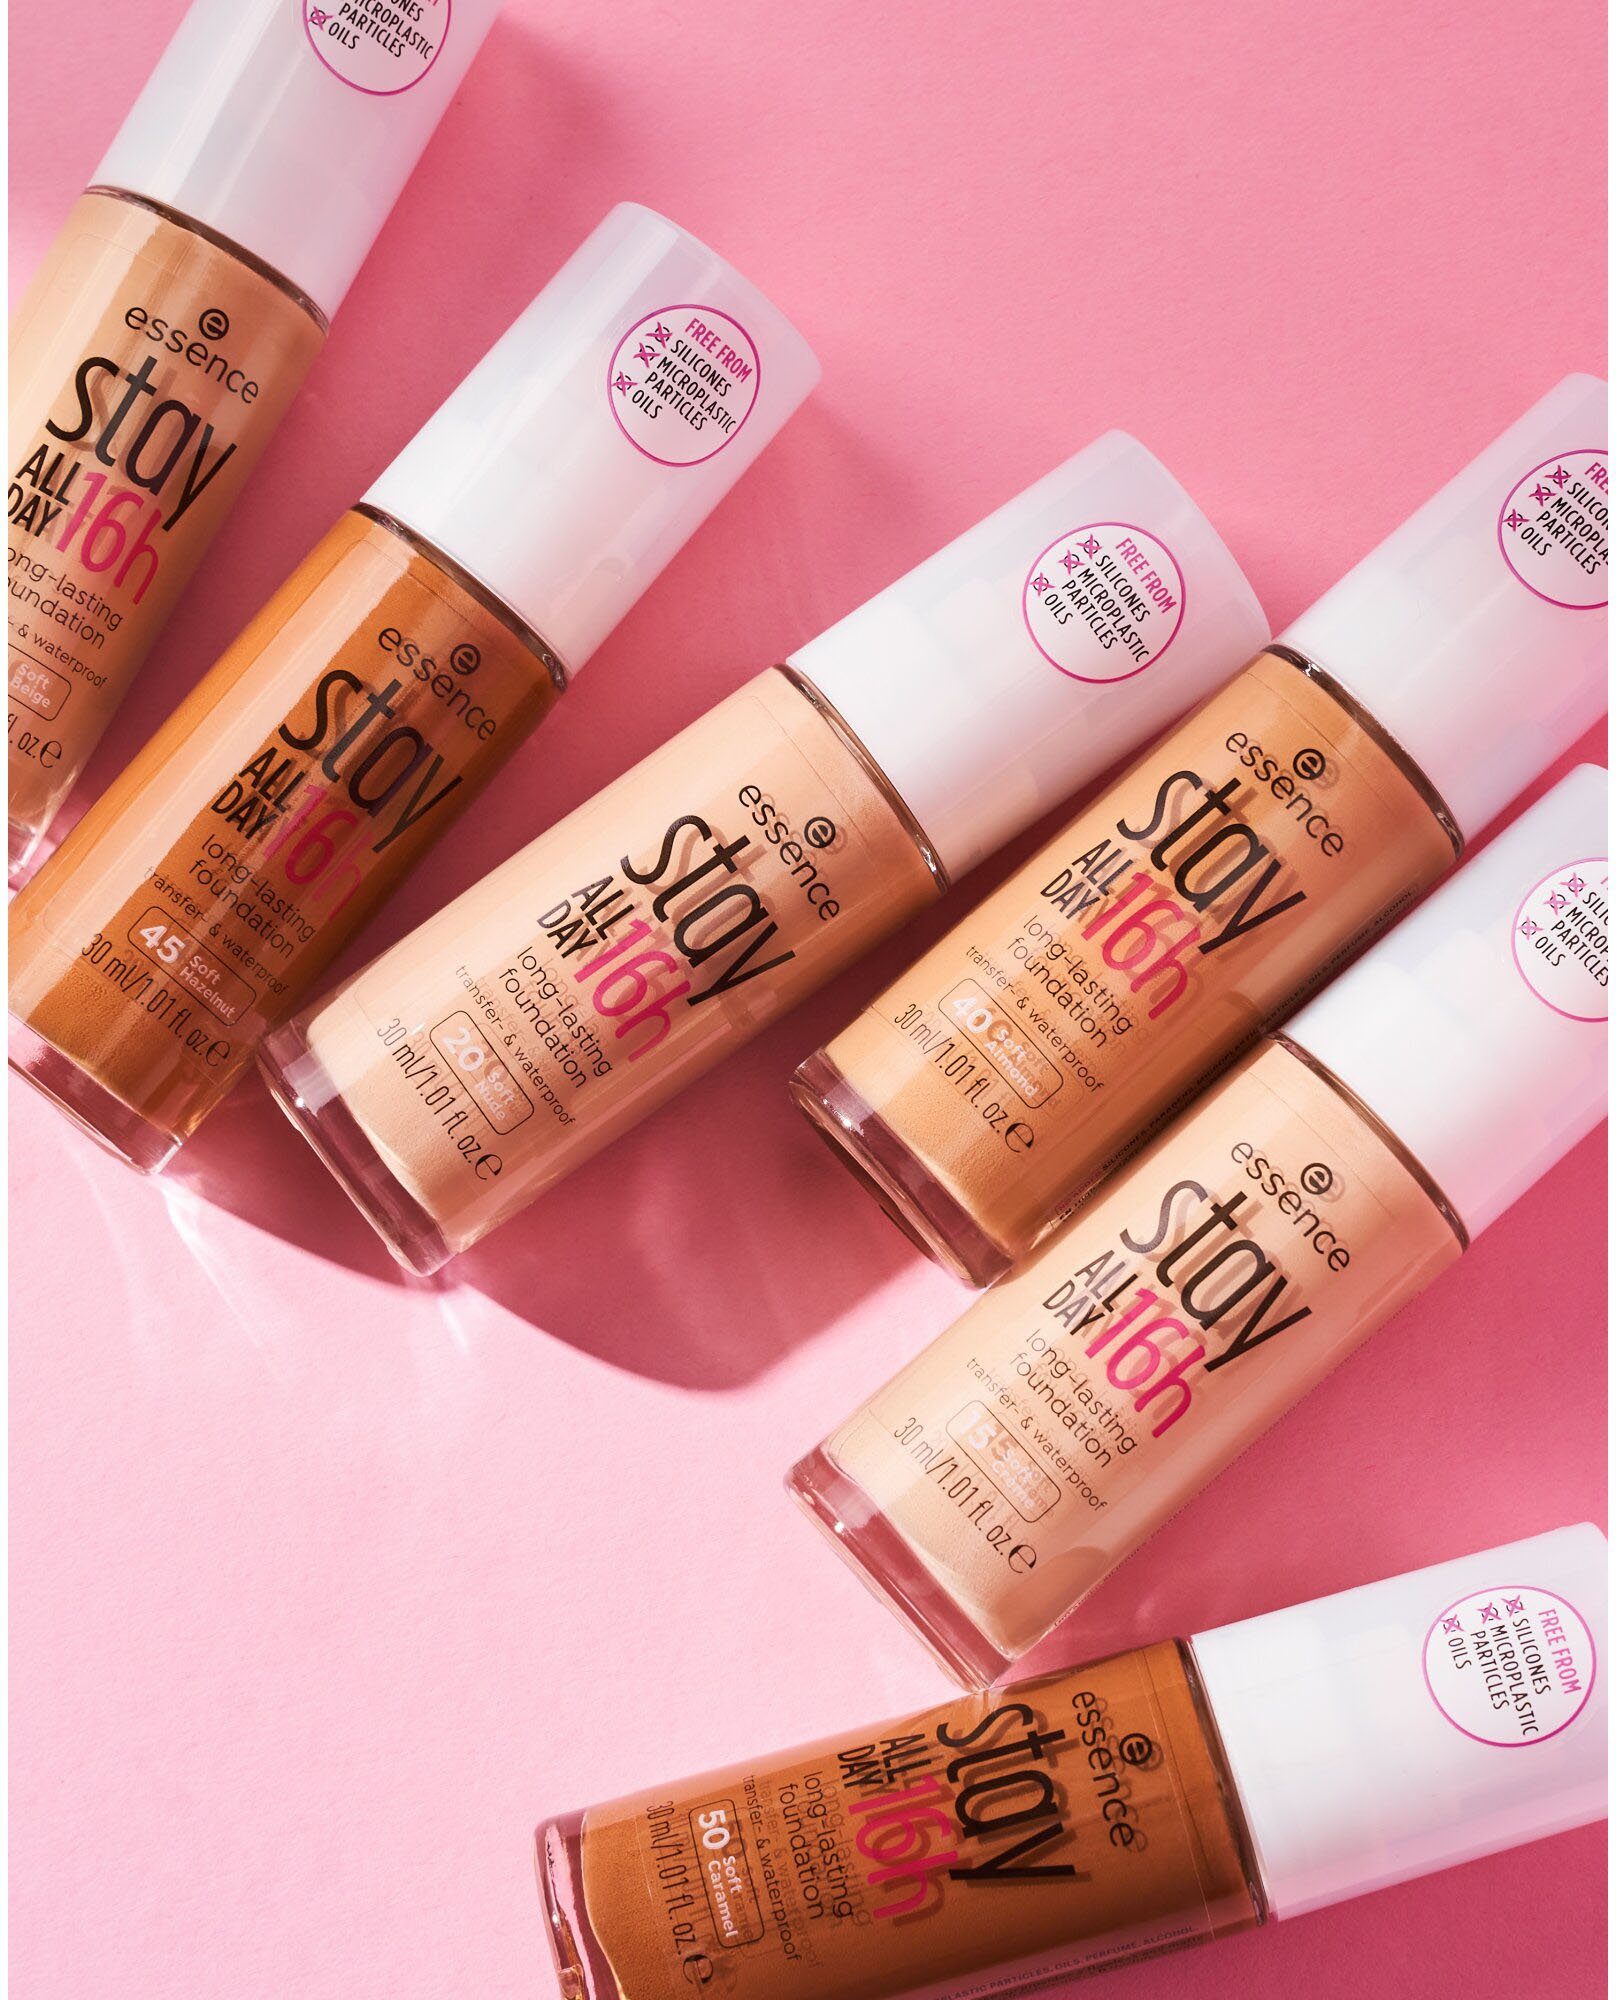 Foundation stay Soft Sand 16h long-lasting, Essence ALL DAY 3-tlg.